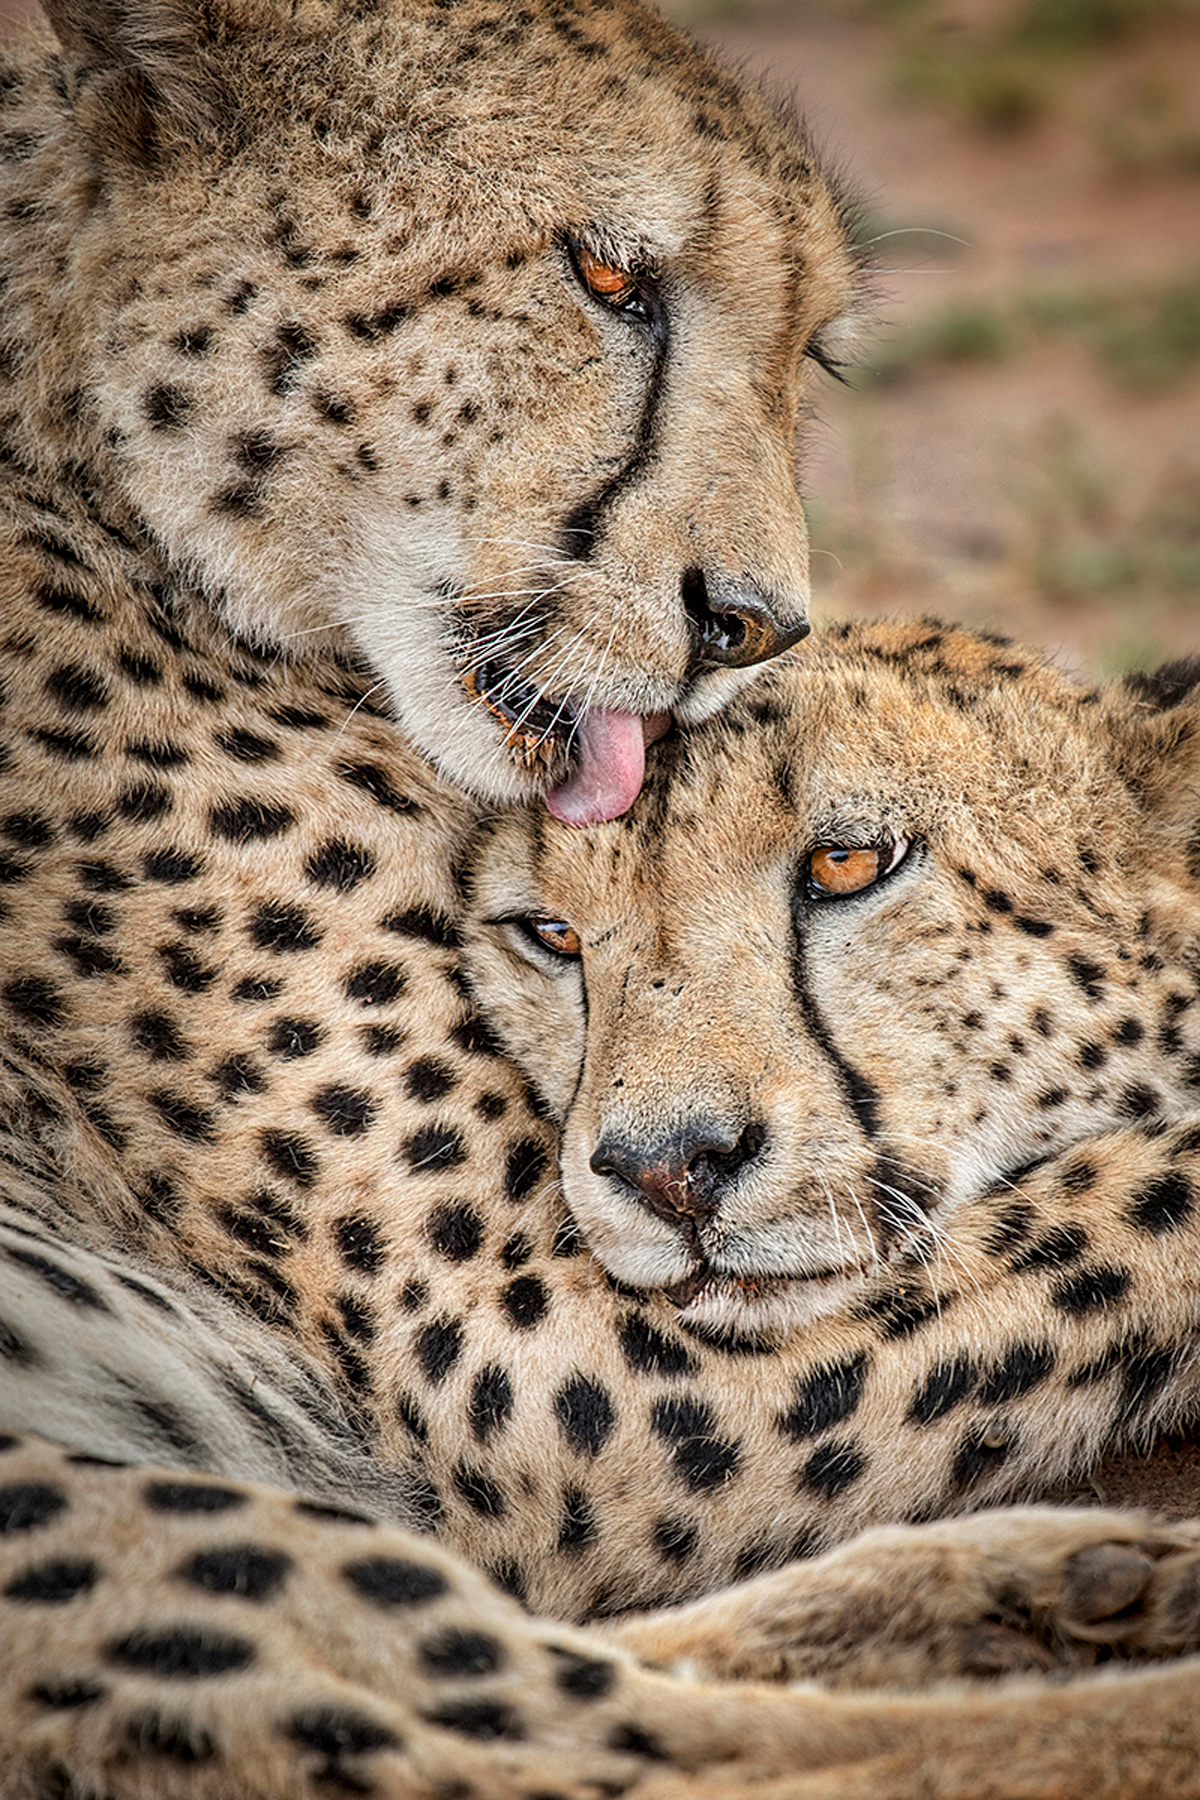 Grooming time for a cheetah in Madikwe Game Reserve, South Africa © Kevin Dooley